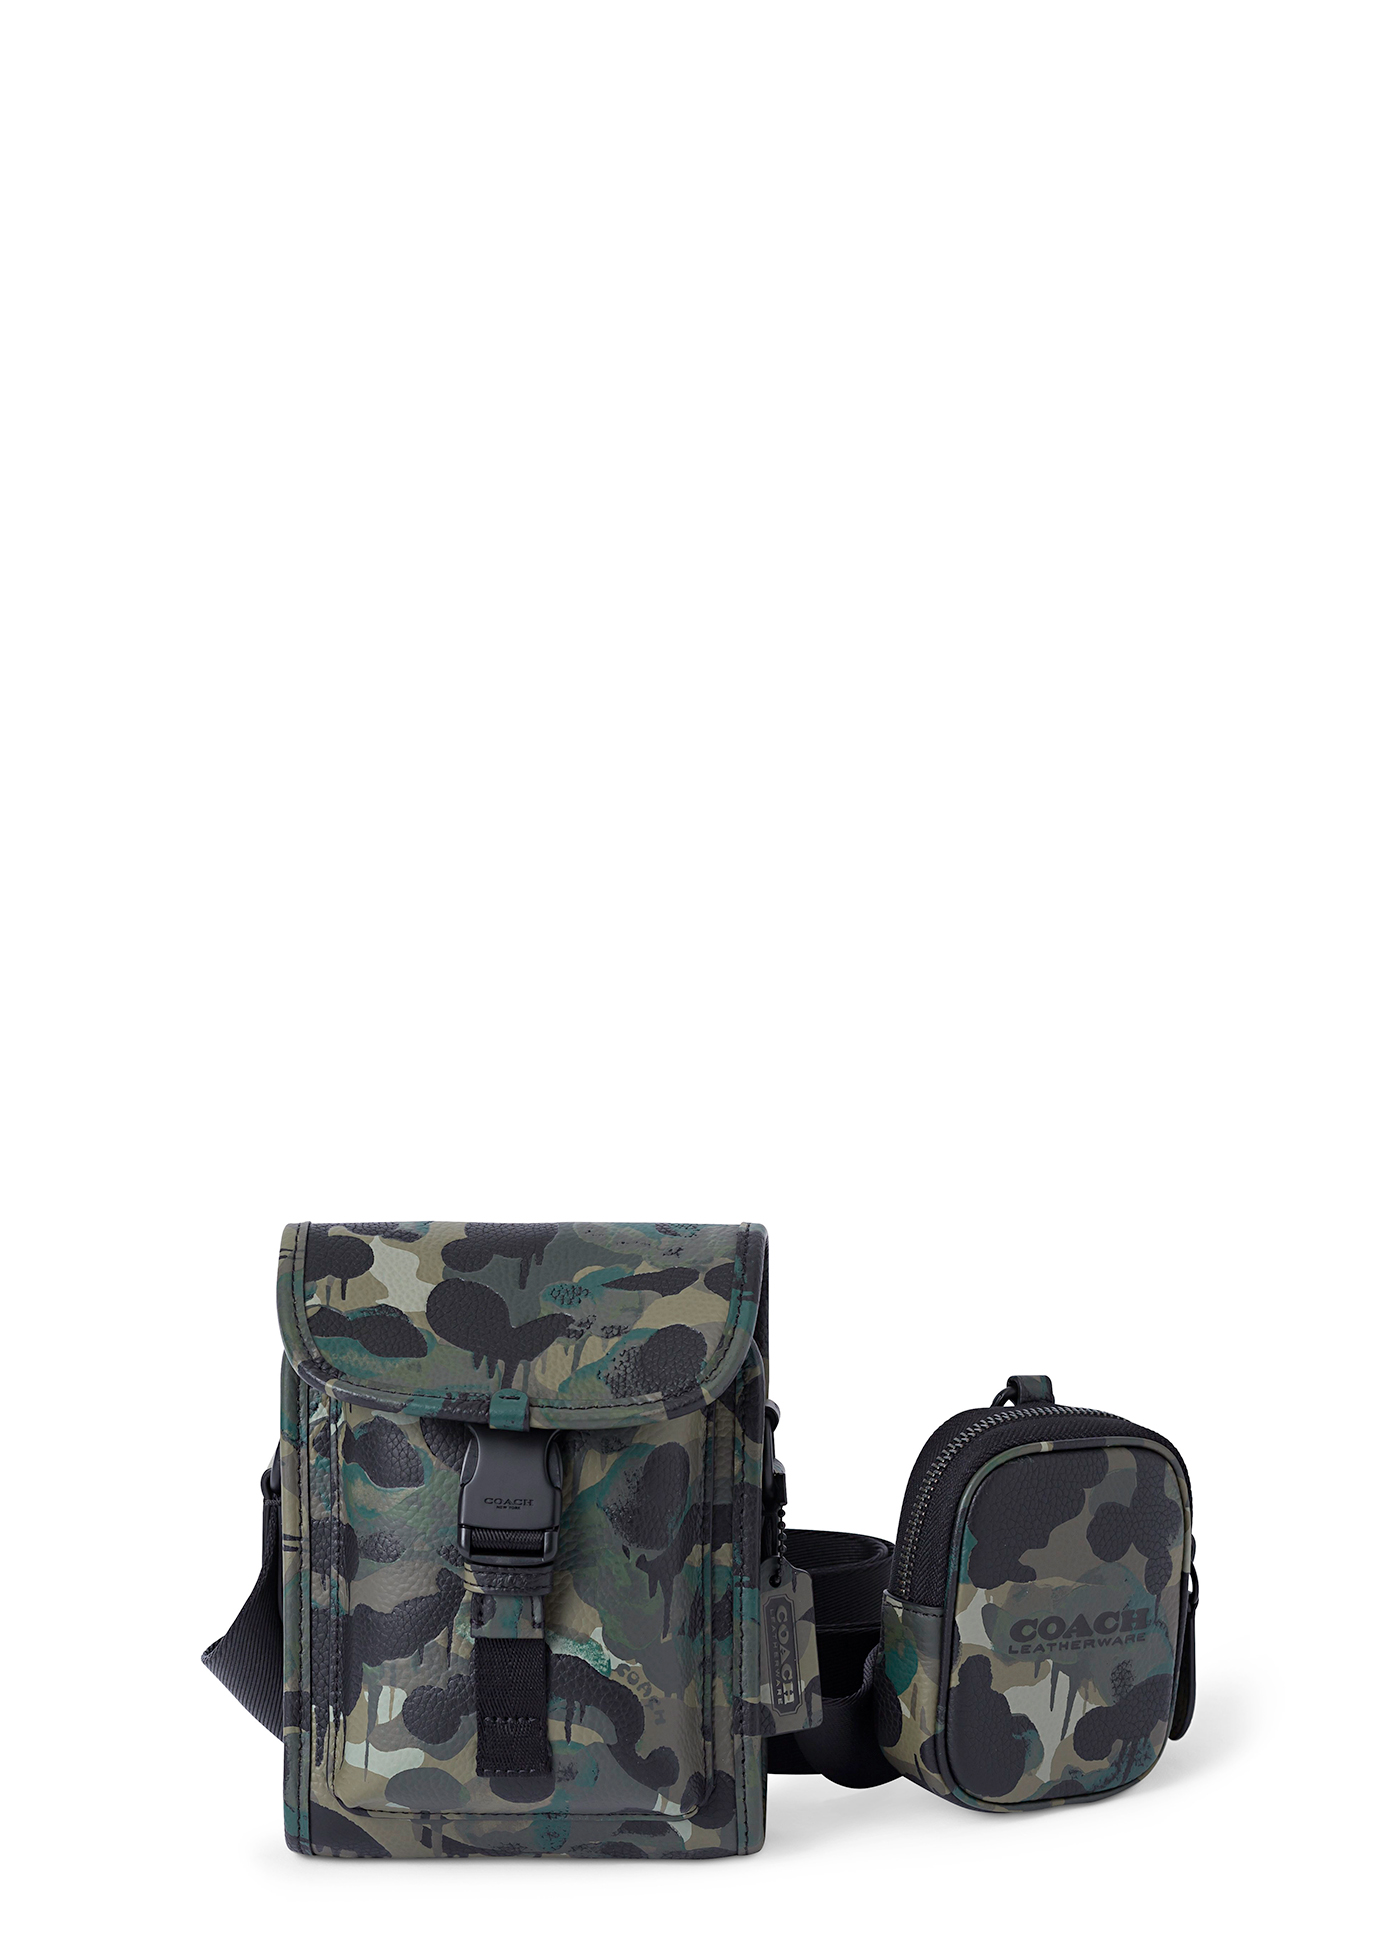 Charter North South Crossbody with Hybrid in Camo Print Leat image number 0